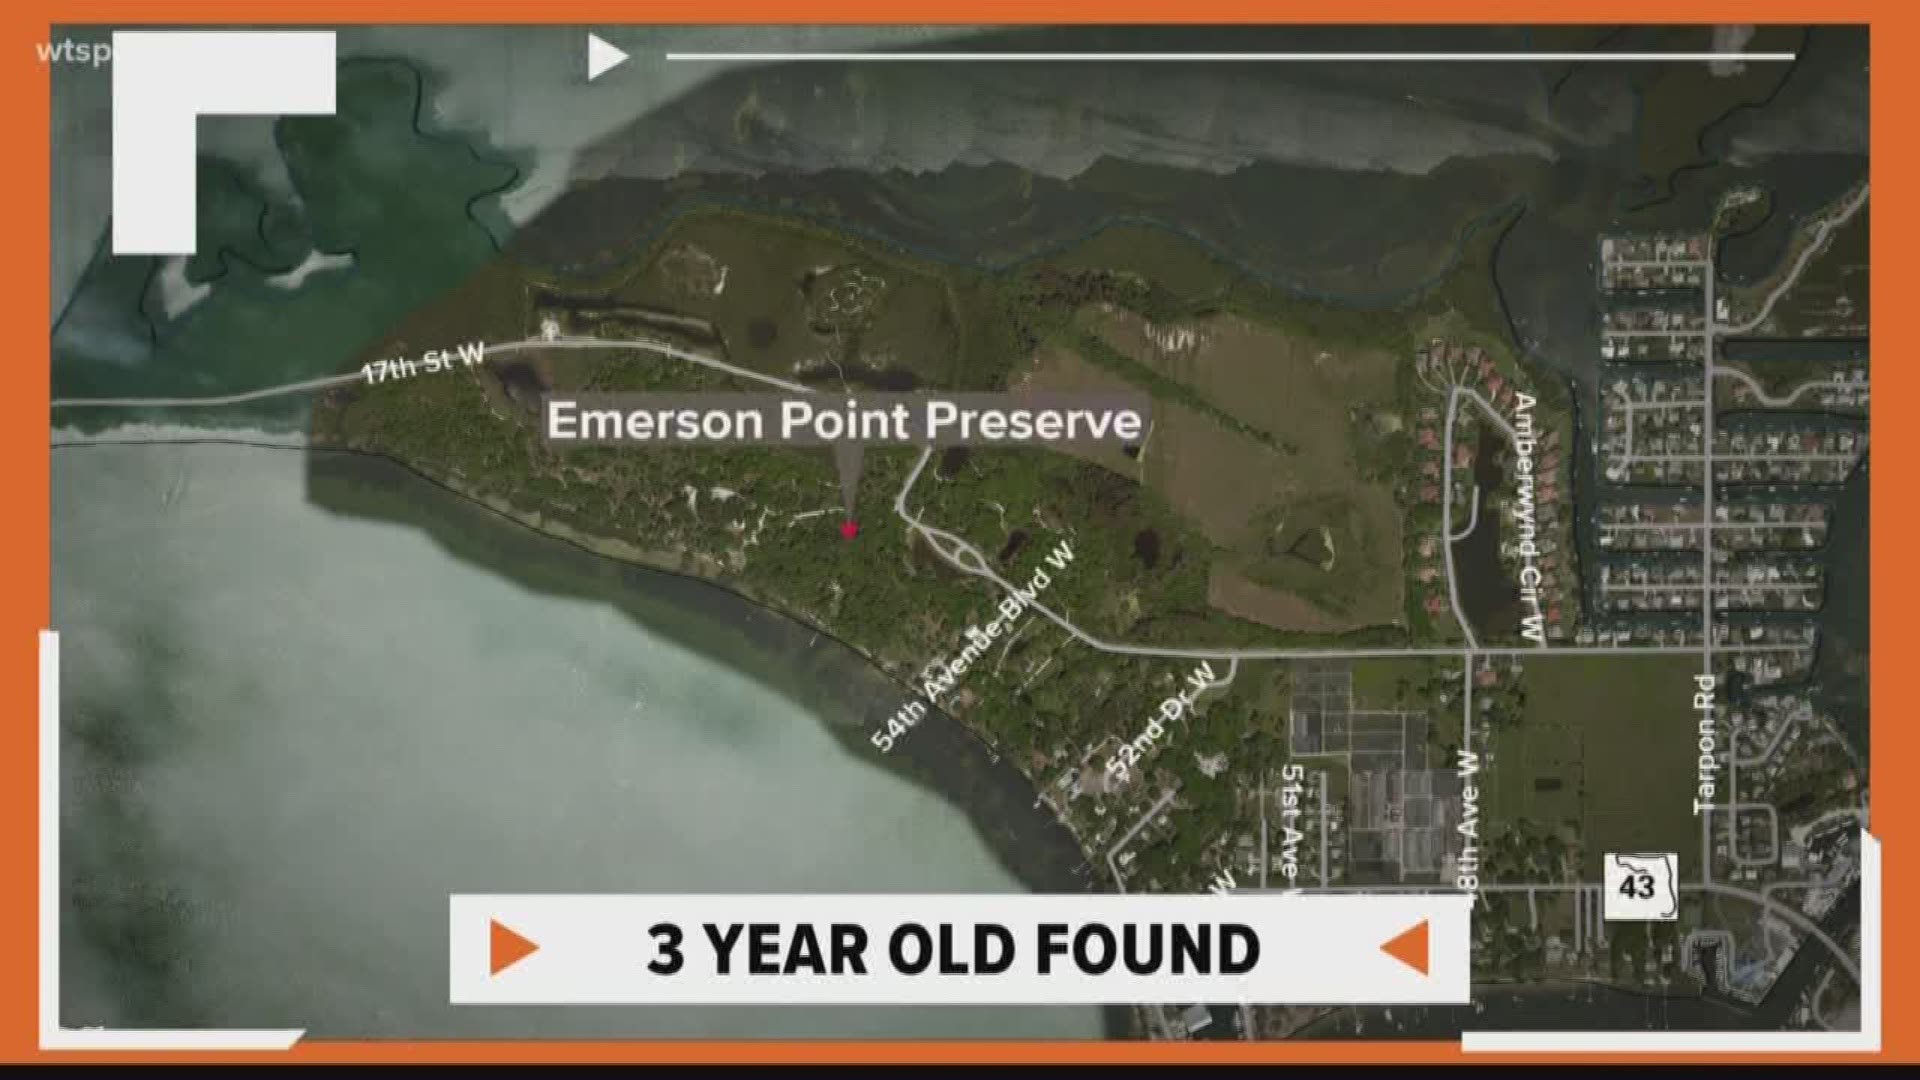 The 3-year-old boy who disappeared under the water after the kayak he was riding in capsized has been found dead.